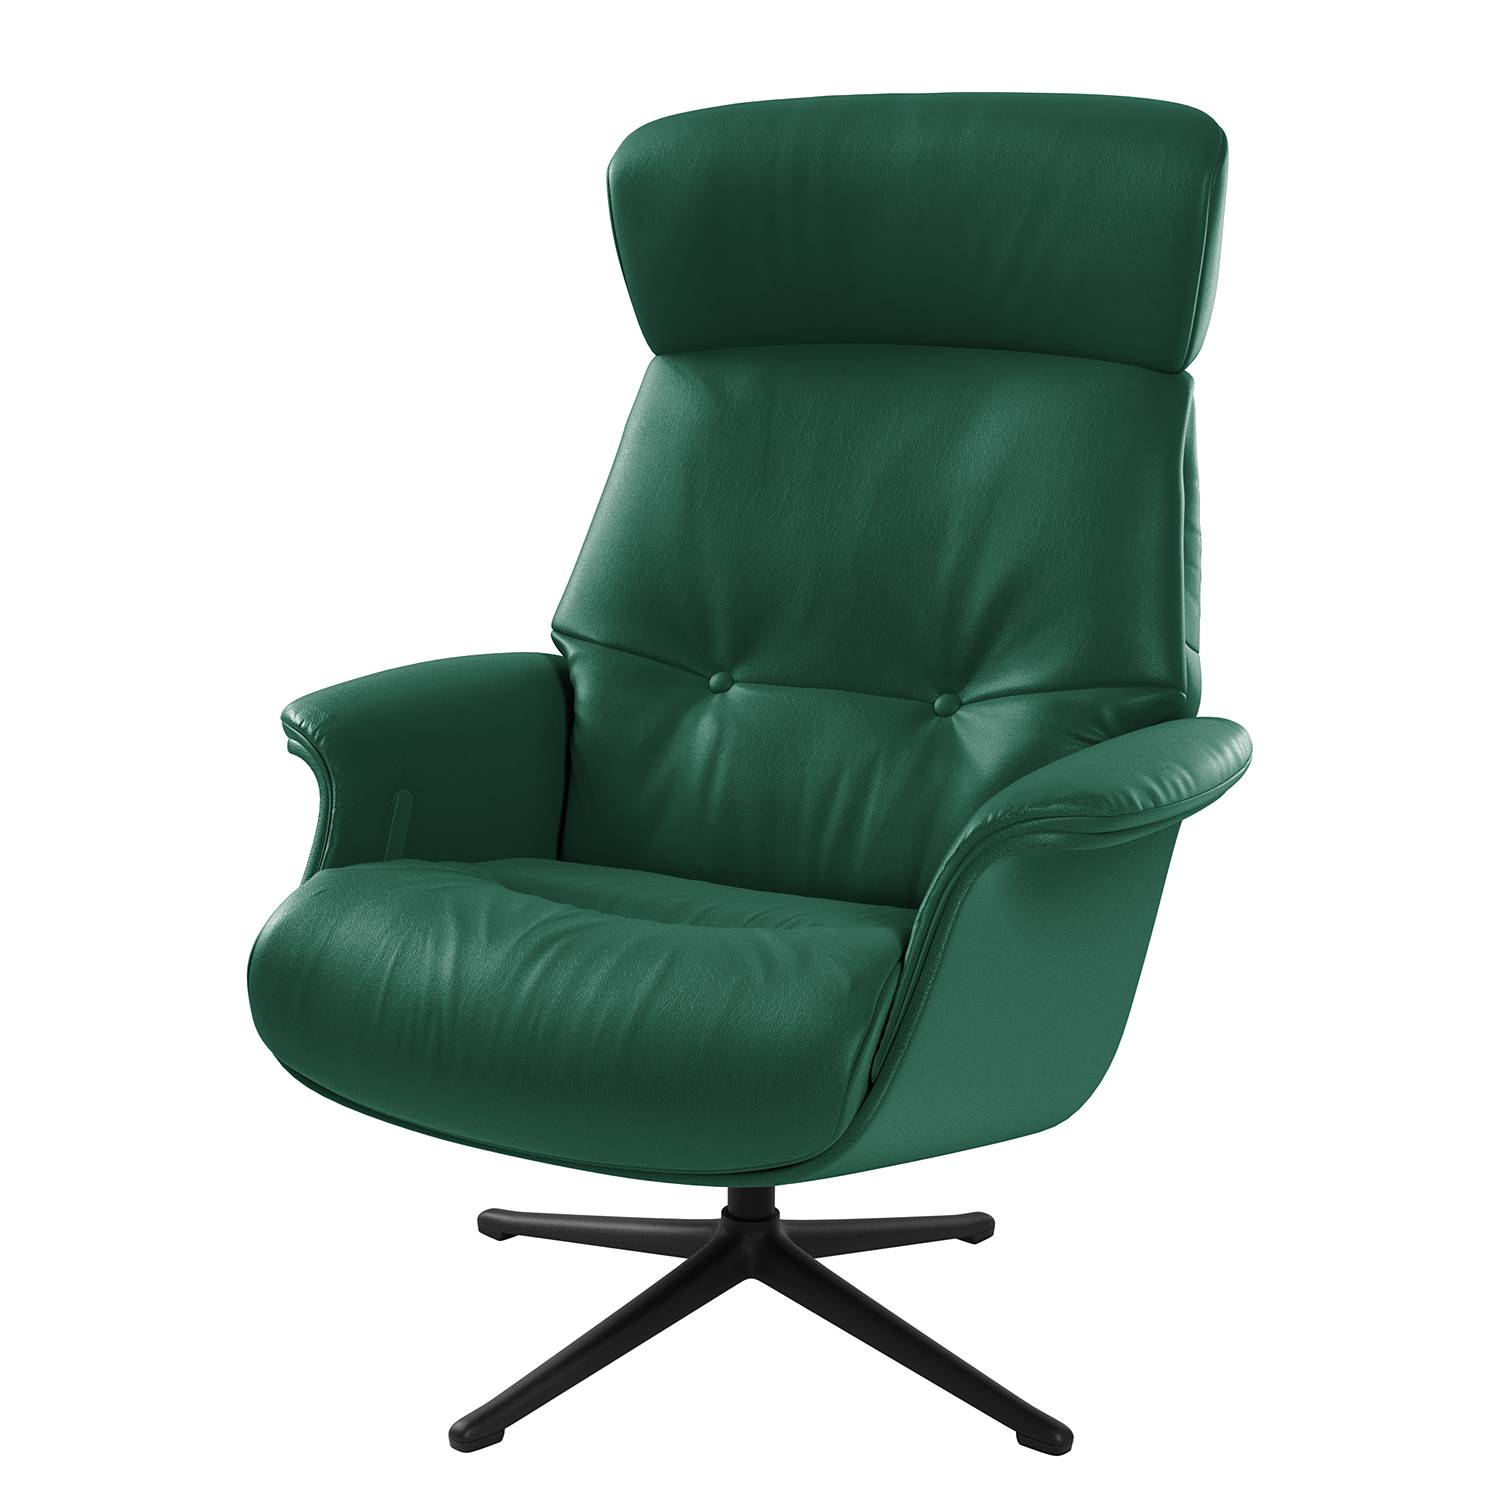 Image of Fauteuil relax Anderson I 000000001000131289